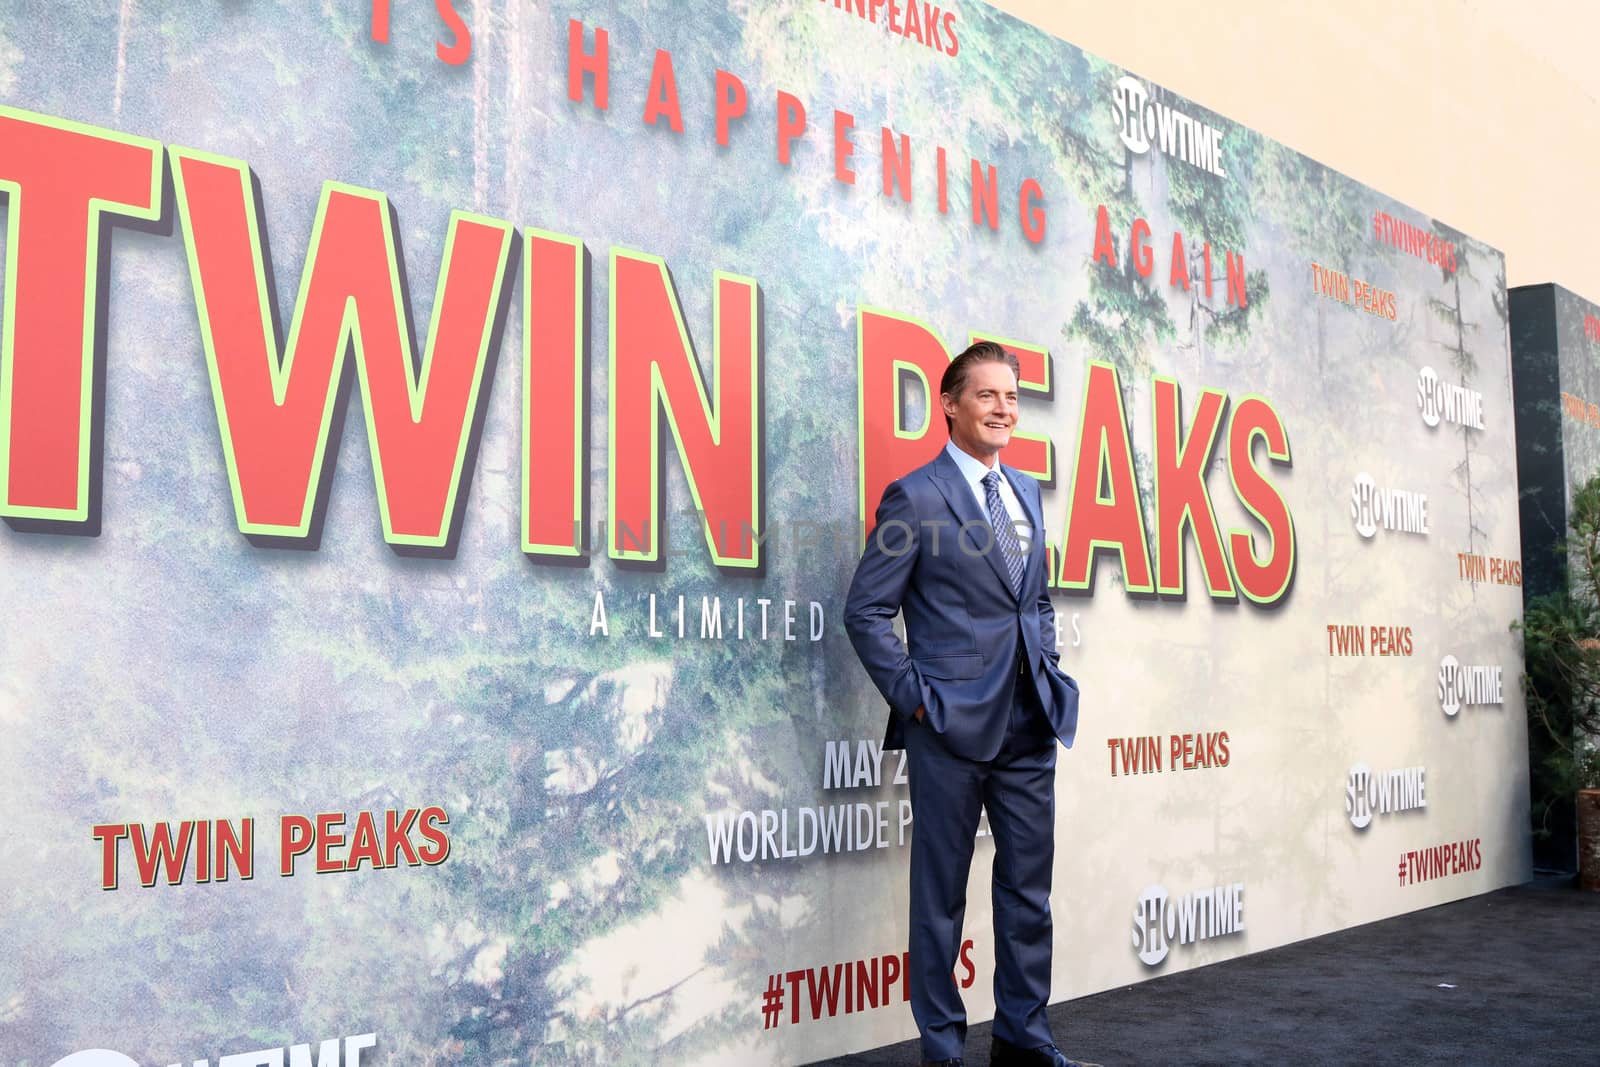 Kyle MacLachlan
at the "Twin Peaks" Premiere Screening, The Theater at Ace Hotel, Los Angeles, CA 05-19-17/ImageCollect by ImageCollect